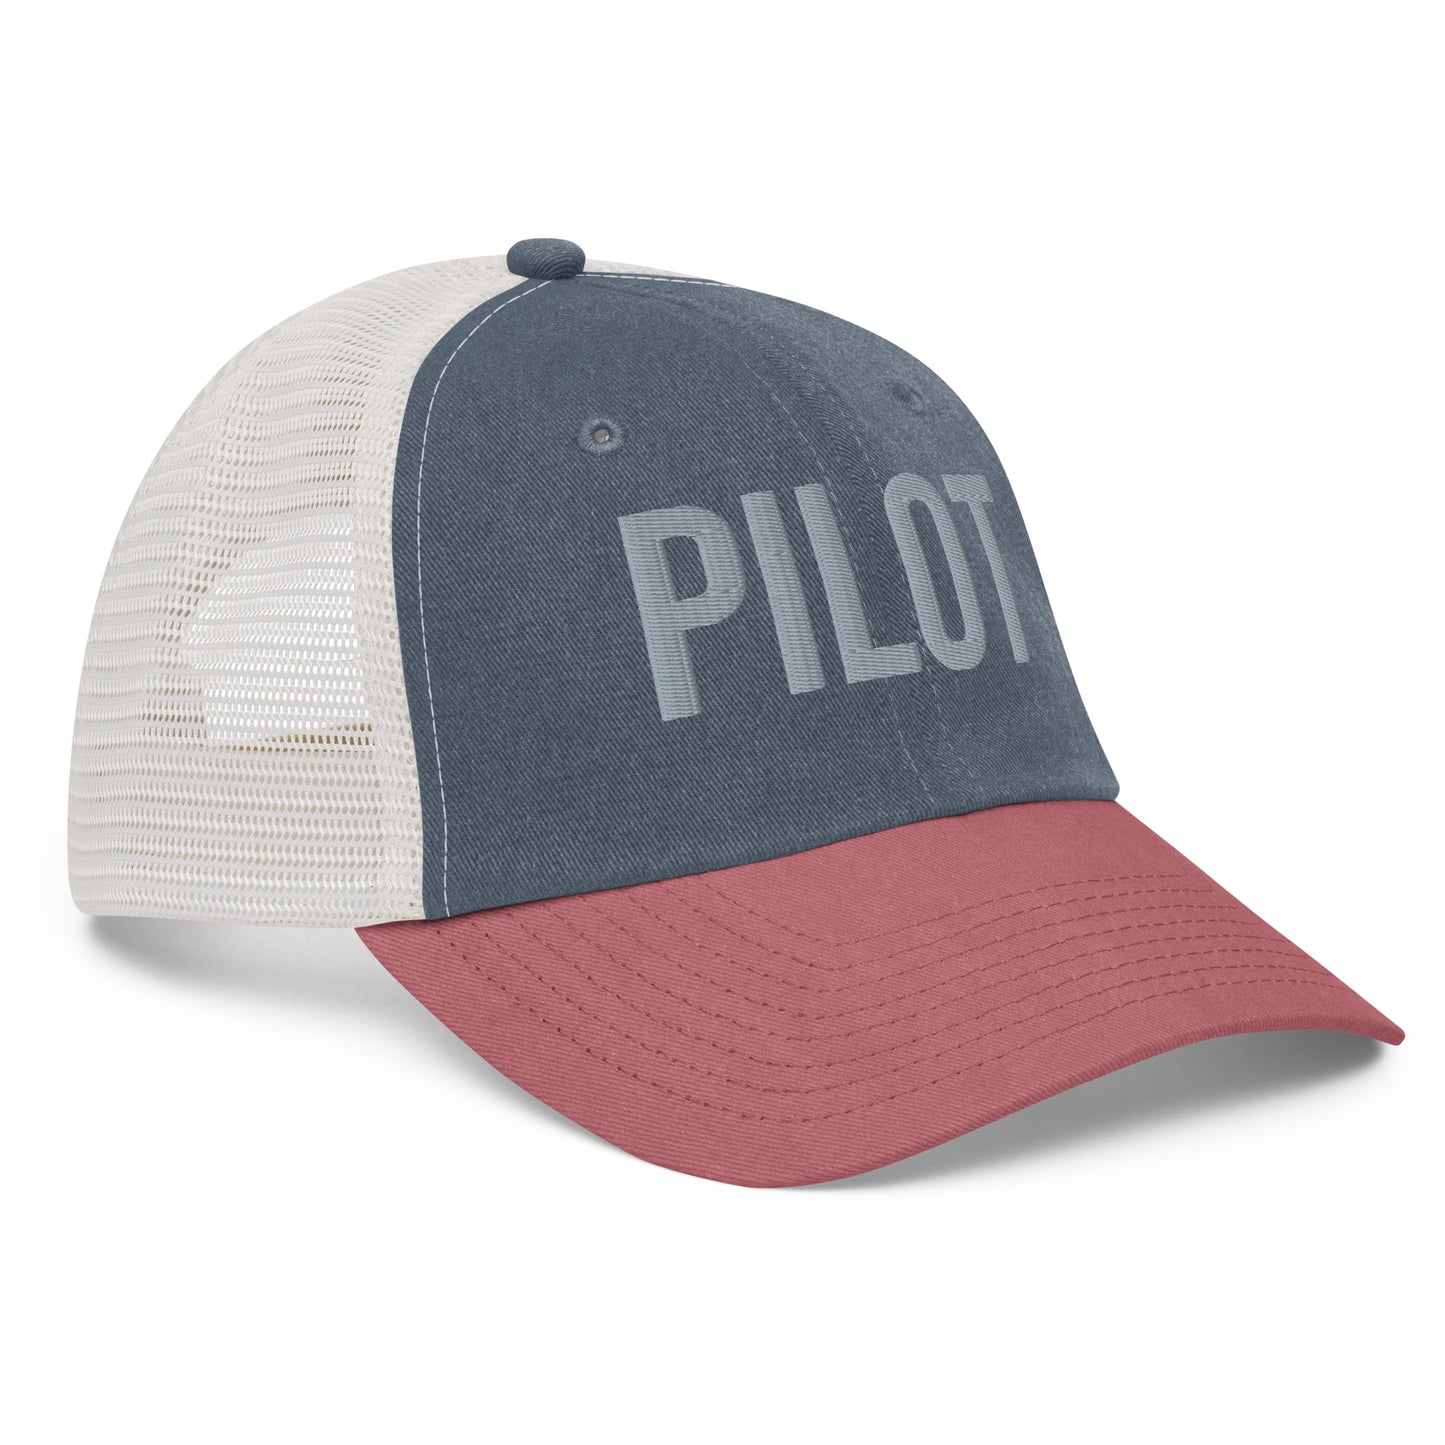 Pilot | Embroidery Pigment-Dyed Cap